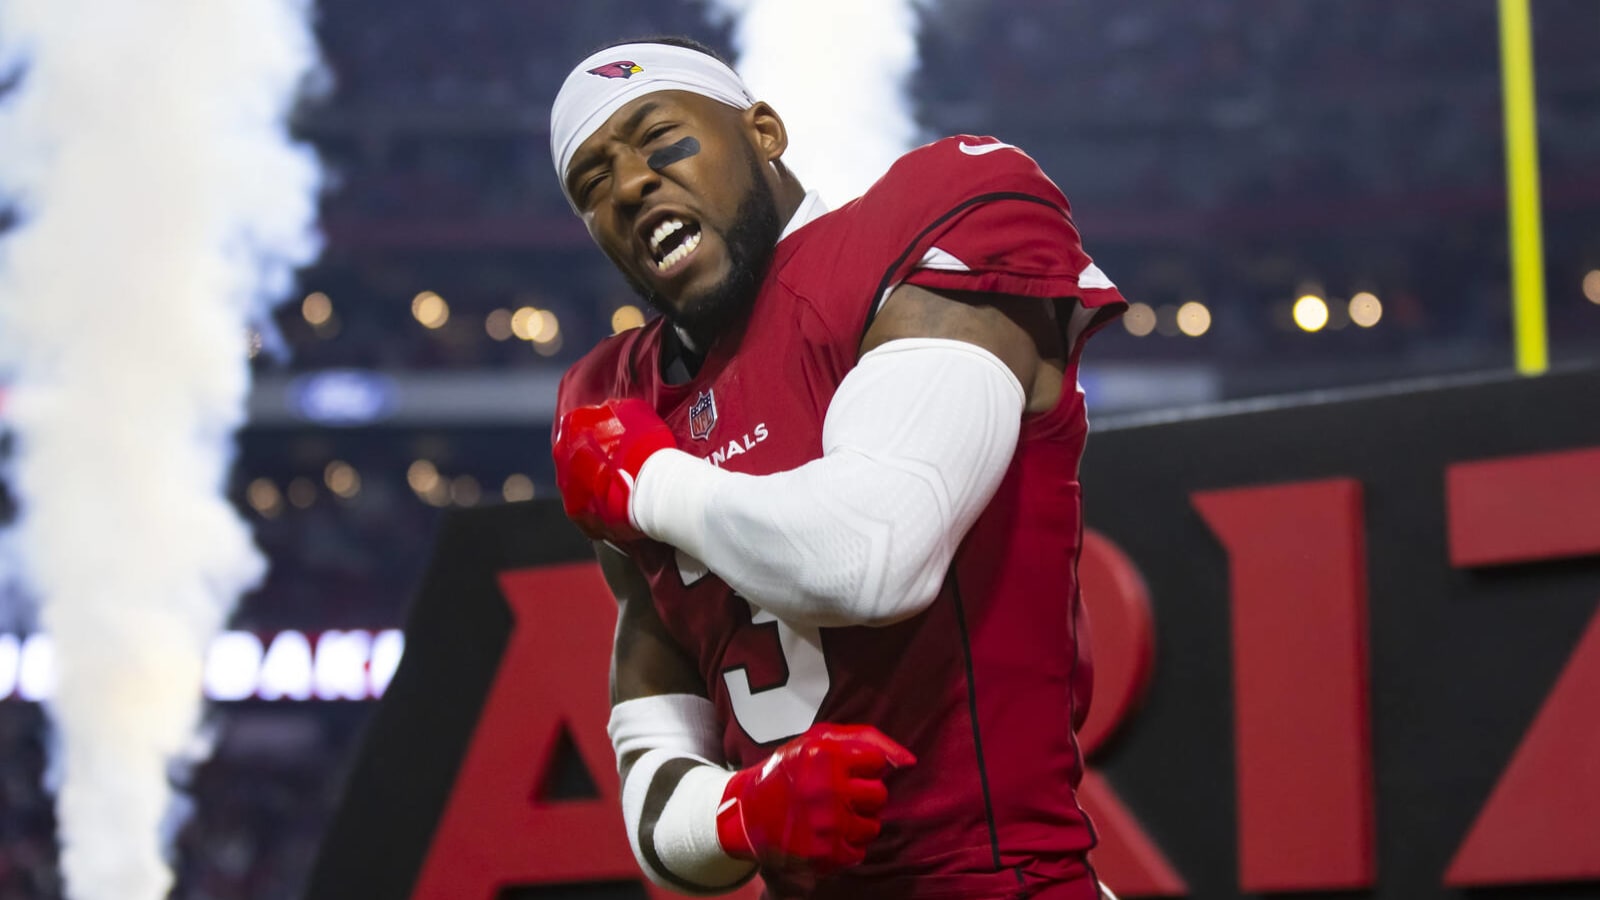 Cardinals Pro Bowl safety reportedly wants to play for contender